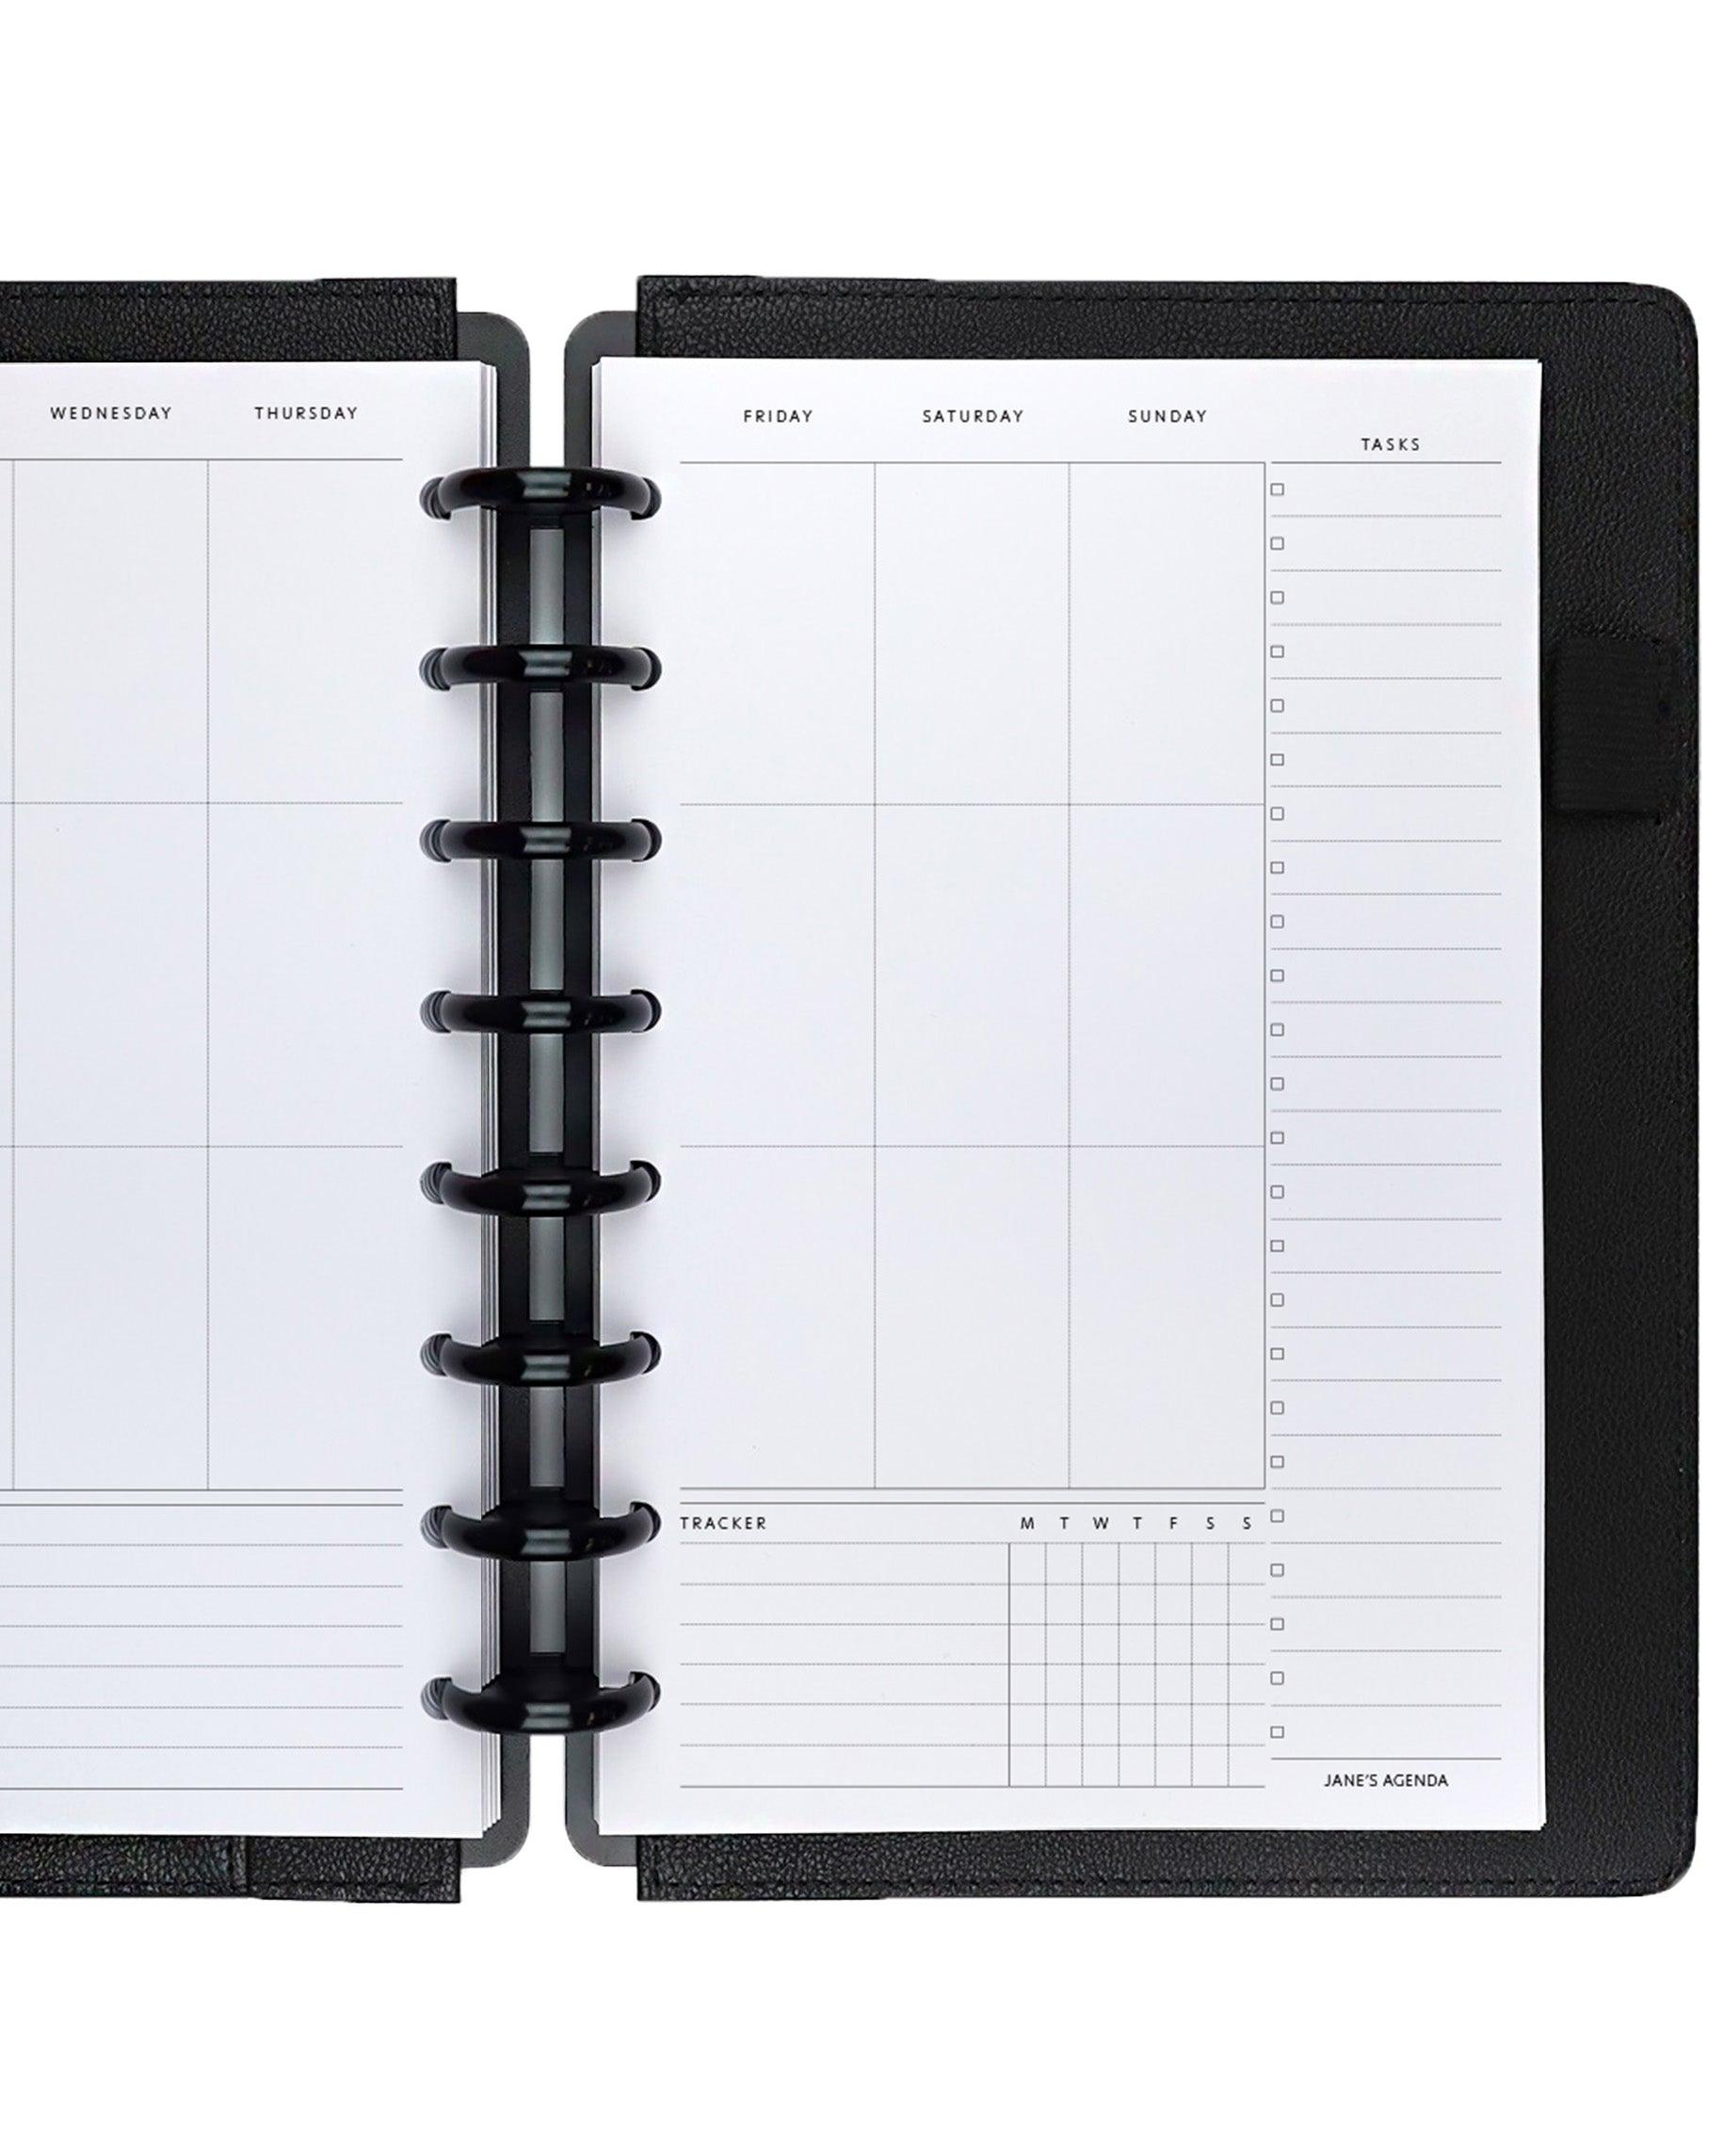 Unated weekly planner inserts for discbound and six ring sizes to us in your disc planner or ringbound planner by Jane's Agenda.